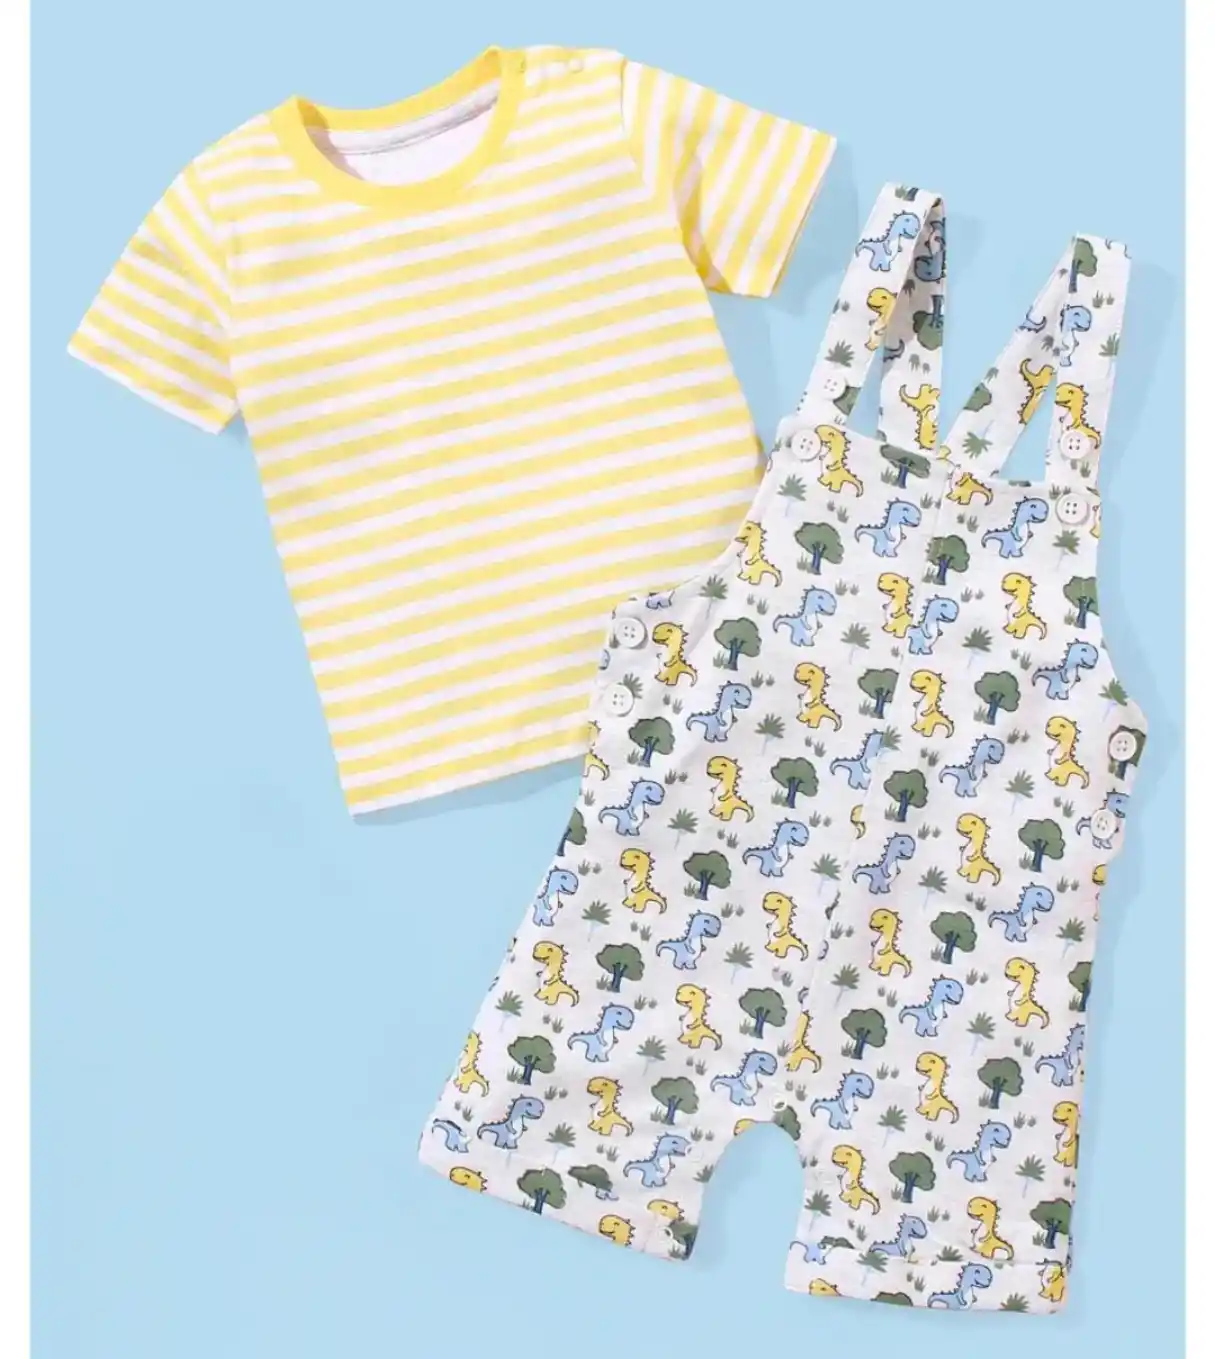 100% Cotton Knit Dungaree and Half Sleeves T-Shirt Set Yellow & Light Blue